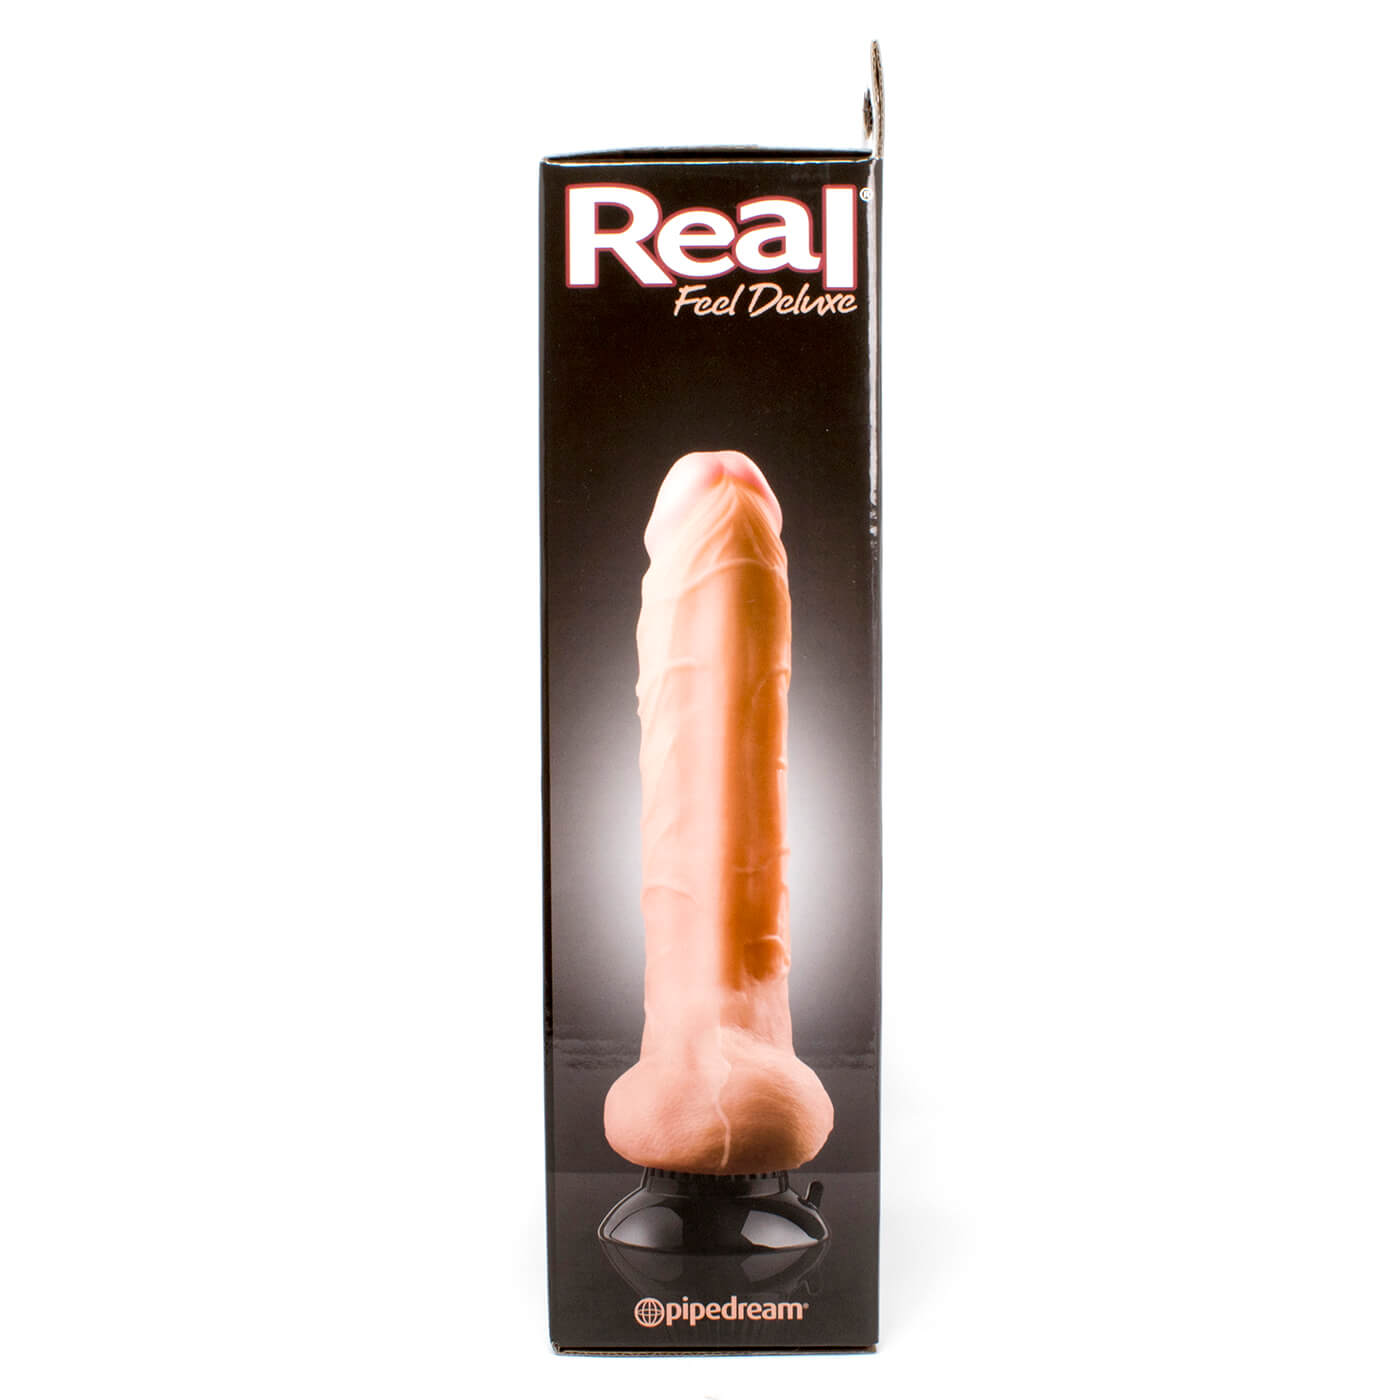 Pipedream Real Feel Deluxe No.6 Powerful Waterproof 7 Inch Realistic Dildo Vibrator